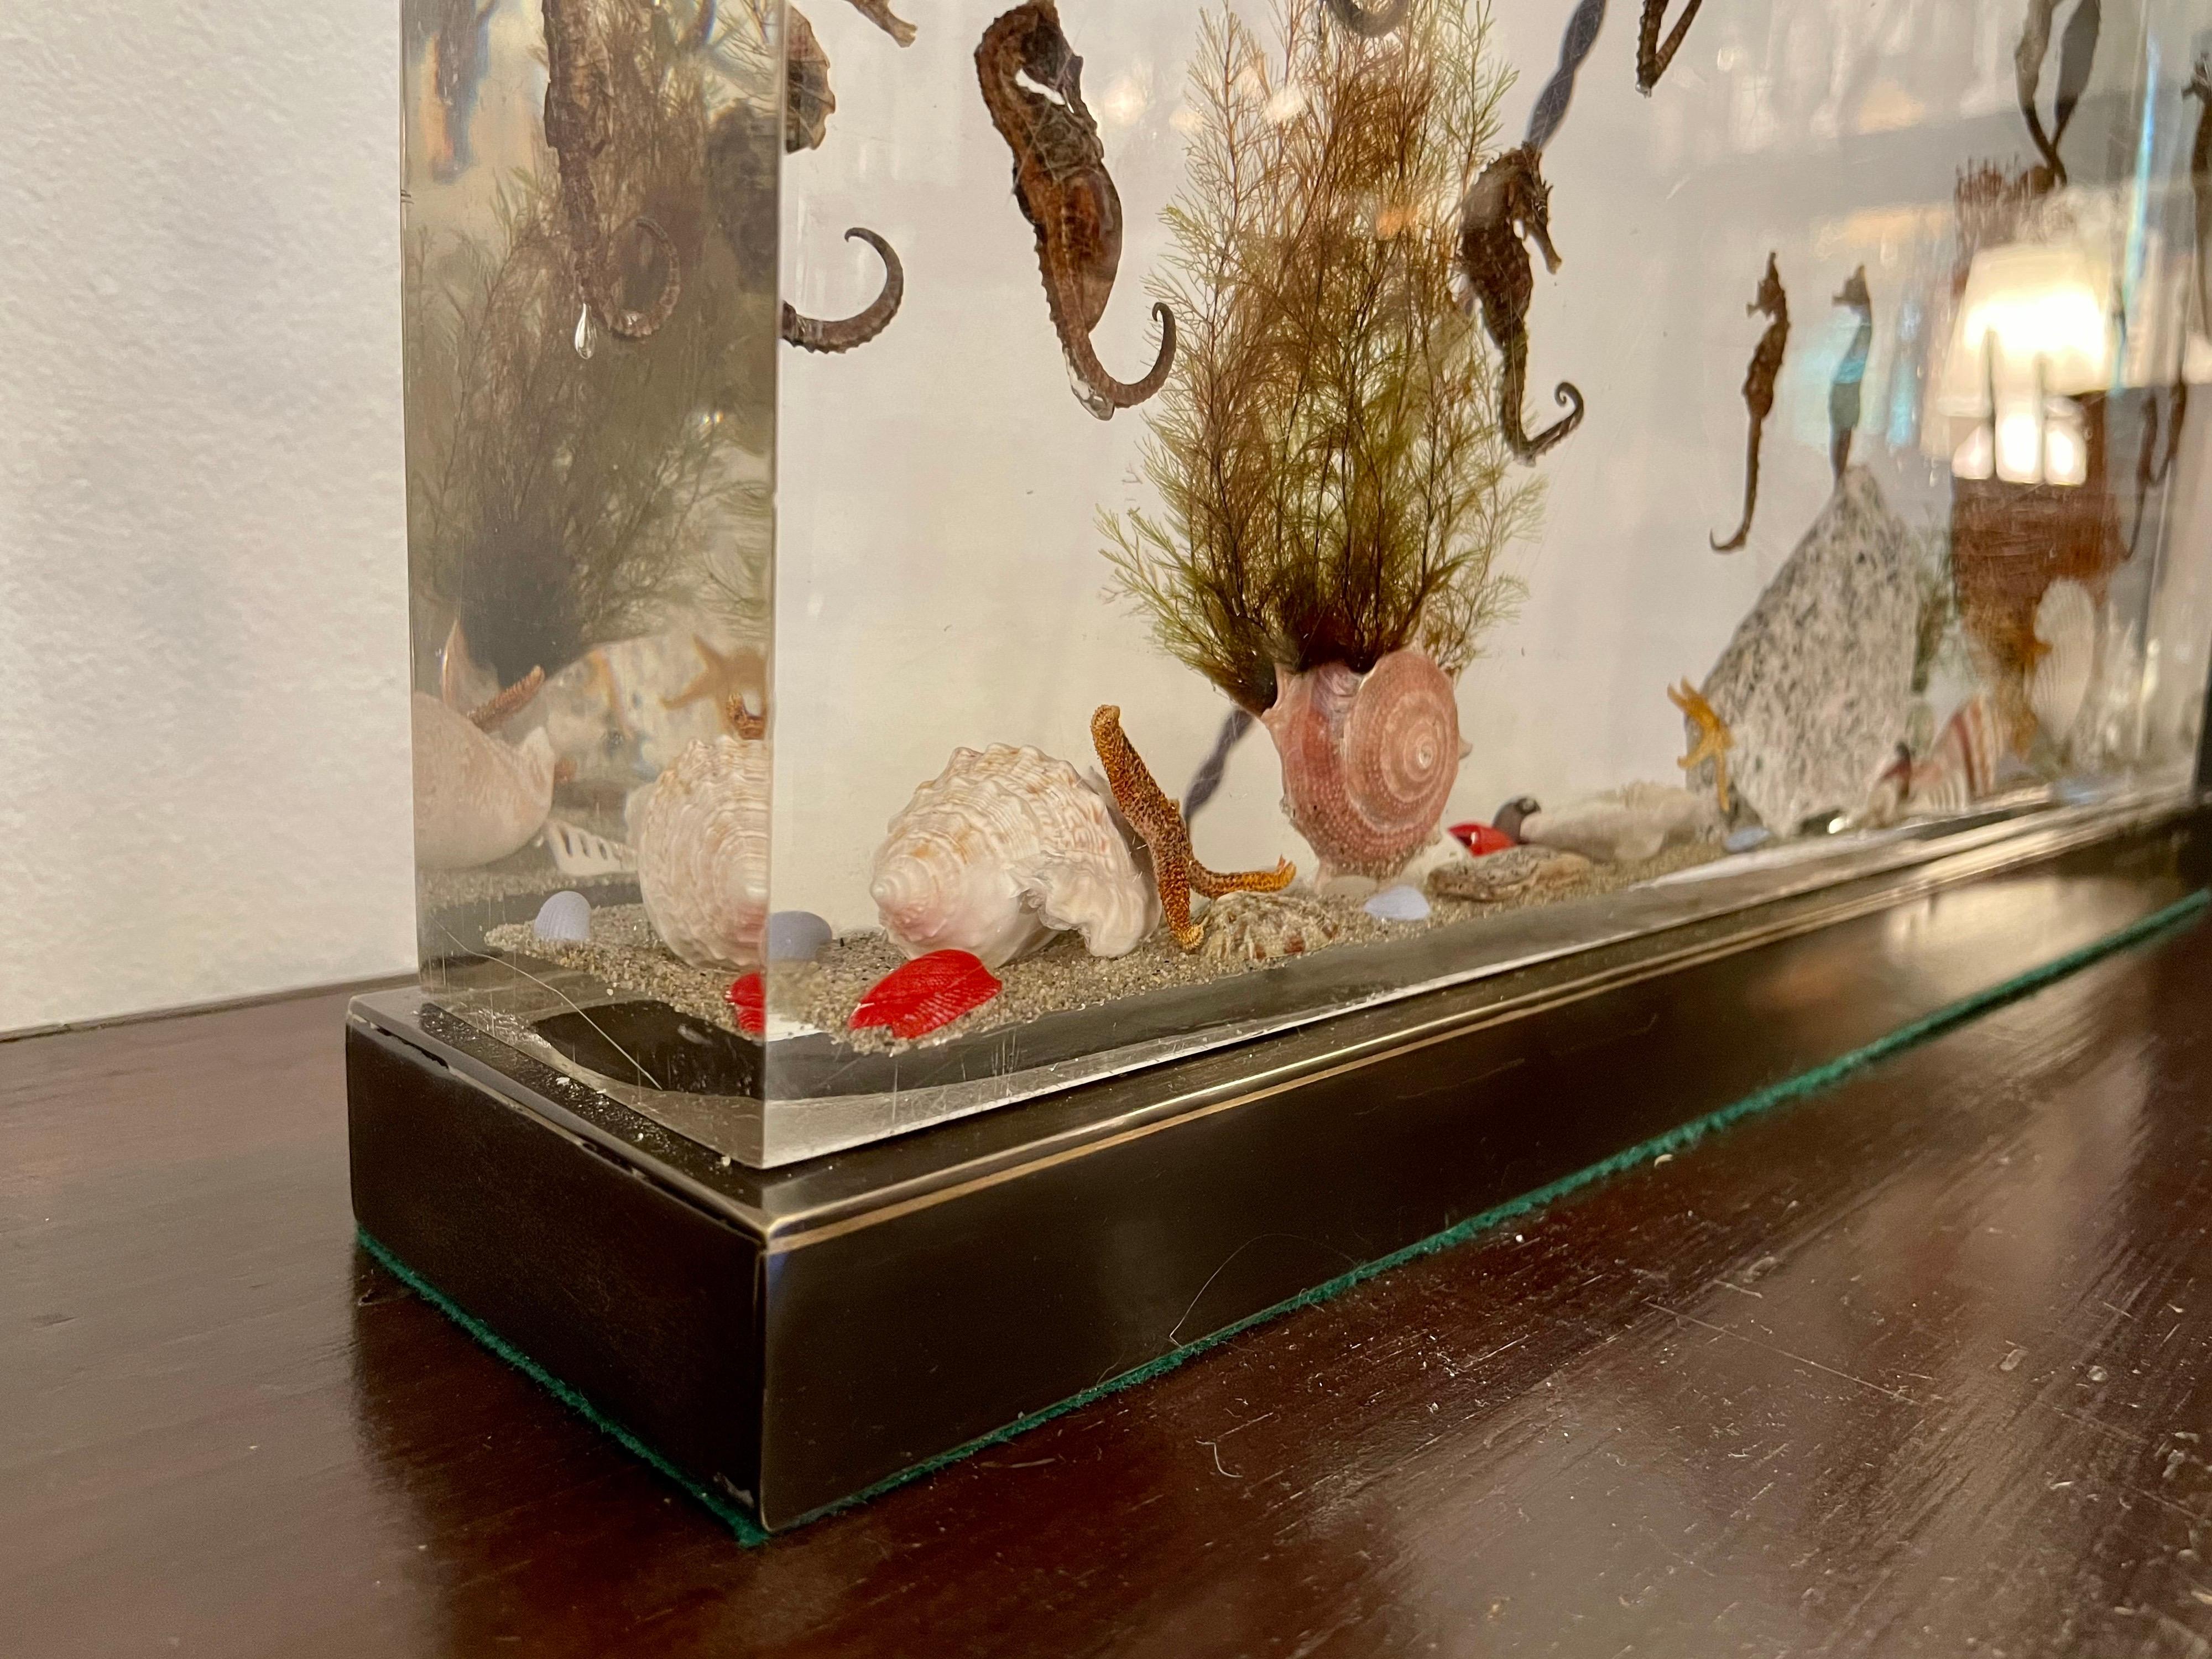 This is an 18.5 x 9 inches block of Resin of an aquarium scene with seahorses, seashells, rocks, etc. Very clean and heavy but 100% vintage. This is mounted on bronze finish base and rewired with double cluster sockets and silk cable. Really a